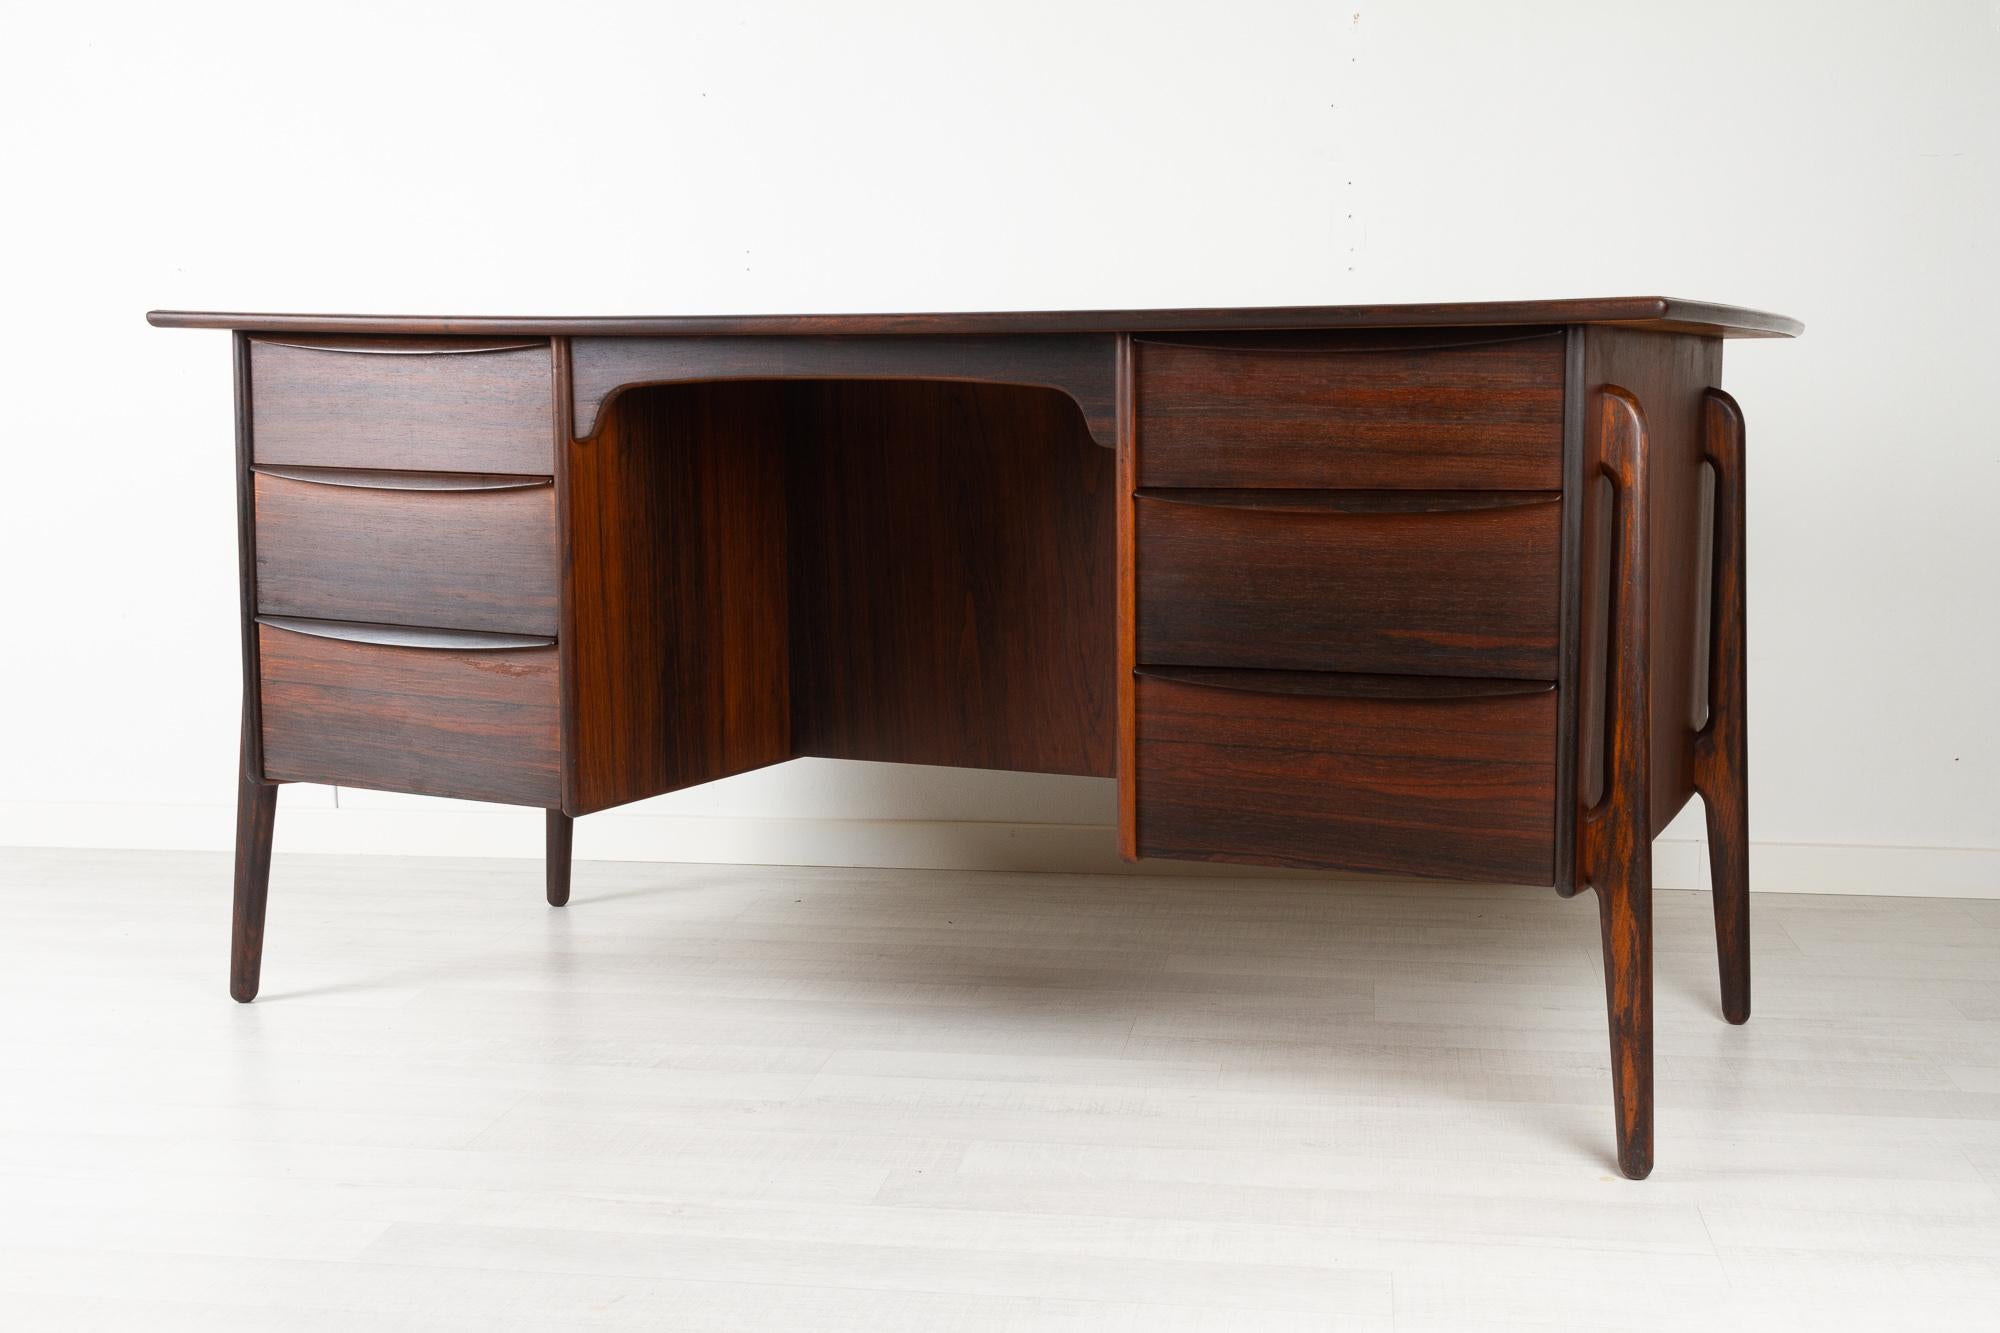 Danish modern rosewood desk by Svend Aage Madsen for Sigurd Hansen Møbelfabrik, Denmark 1960s.
Rare Danish modern free standing writing desk in Rosewood model SH 88. 
Six drawers in front with sculpted pulls in solid Rosewood. Top left drawer has